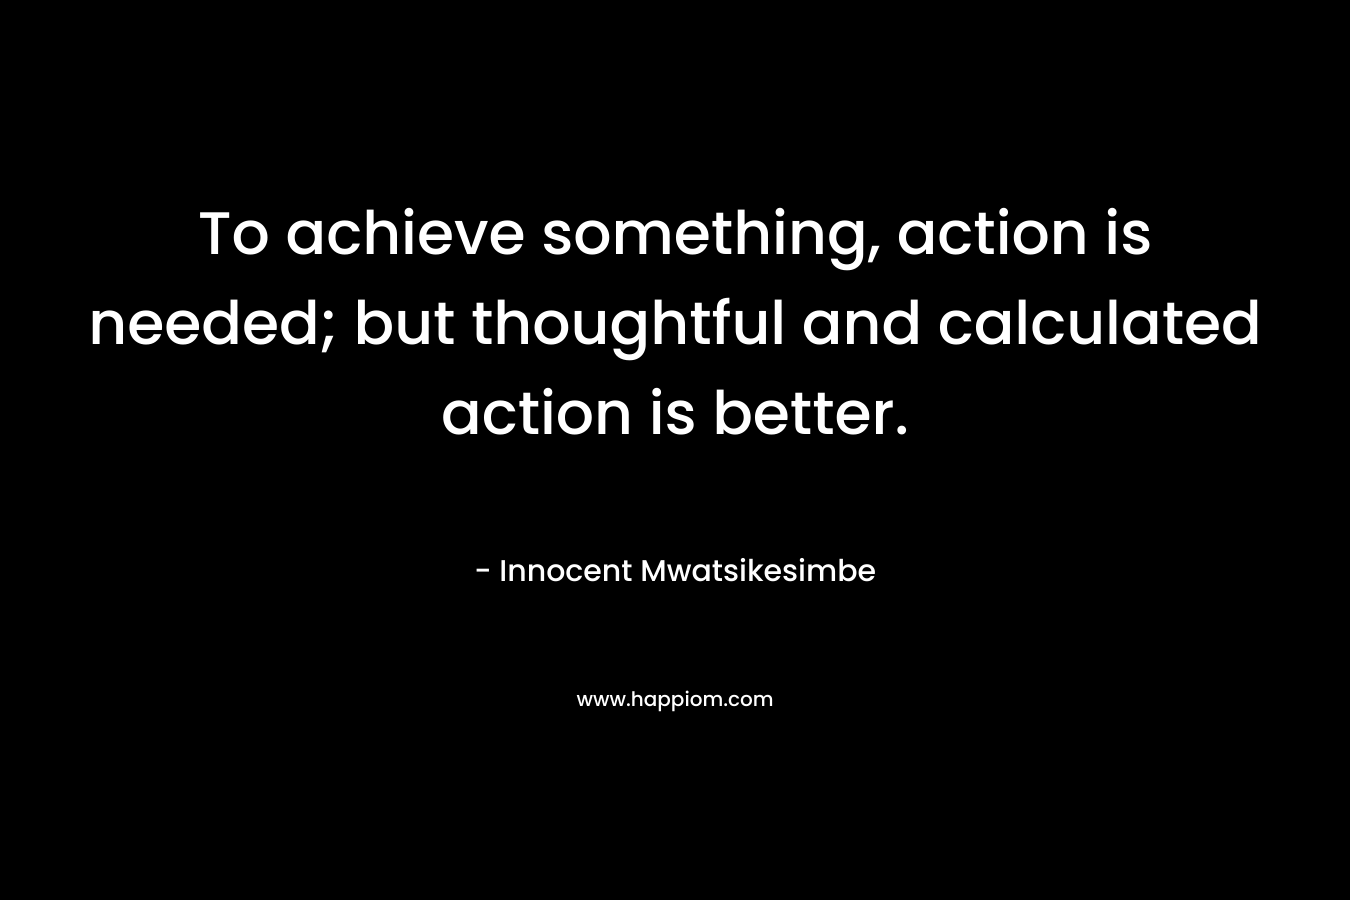 To achieve something, action is needed; but thoughtful and calculated action is better. – Innocent Mwatsikesimbe